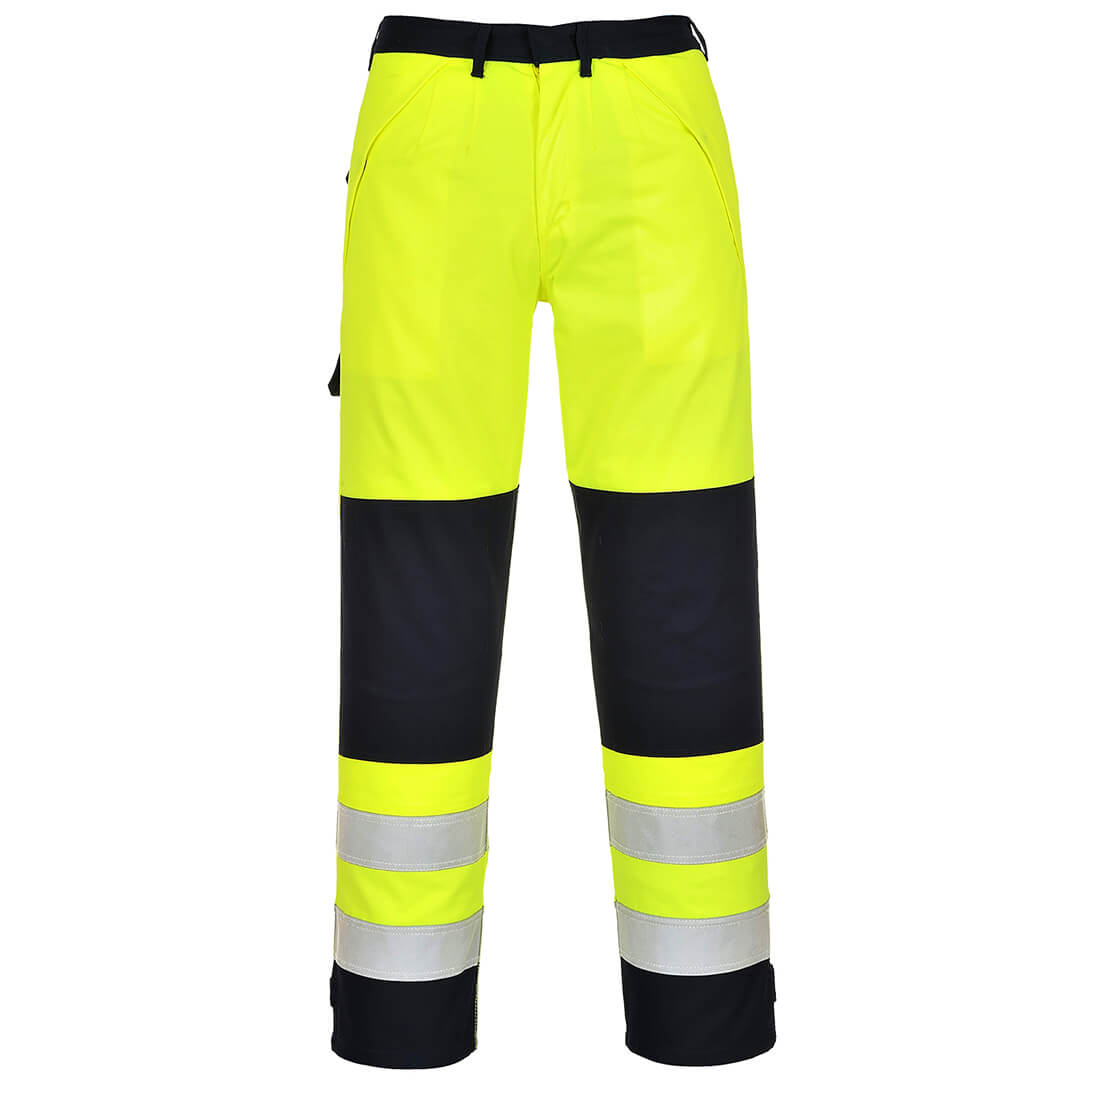 Photo of Biz Flame Hi Vis Multi-norm Flame Resistant Trousers Yellow / Navy 3xl